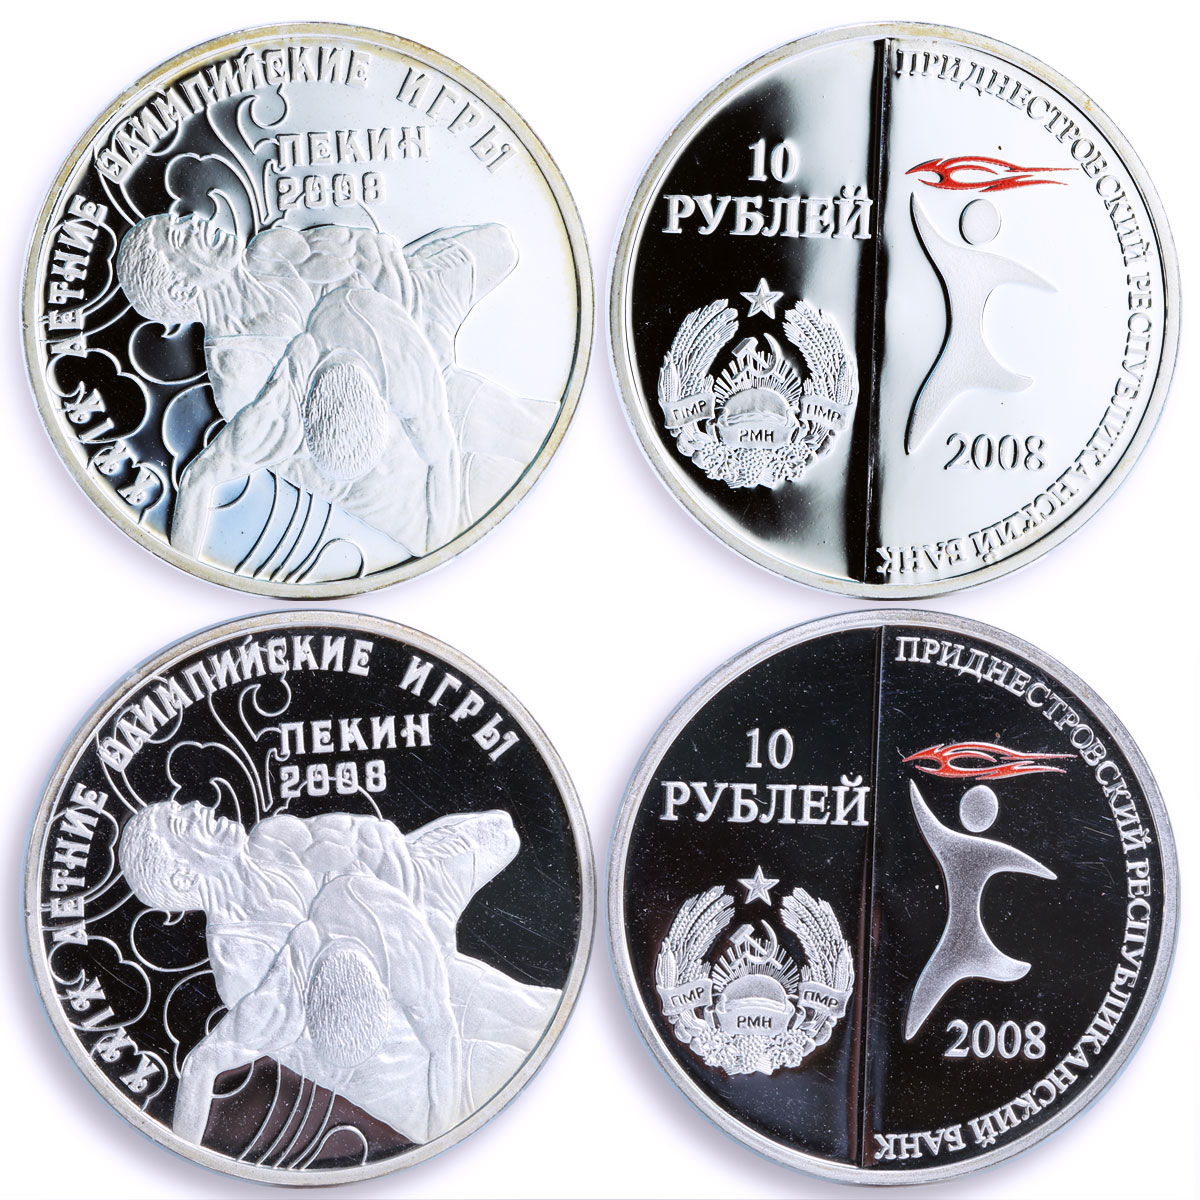 Transnistria set of 6 coins Beijing Olympic Games Sports silver coins 2008